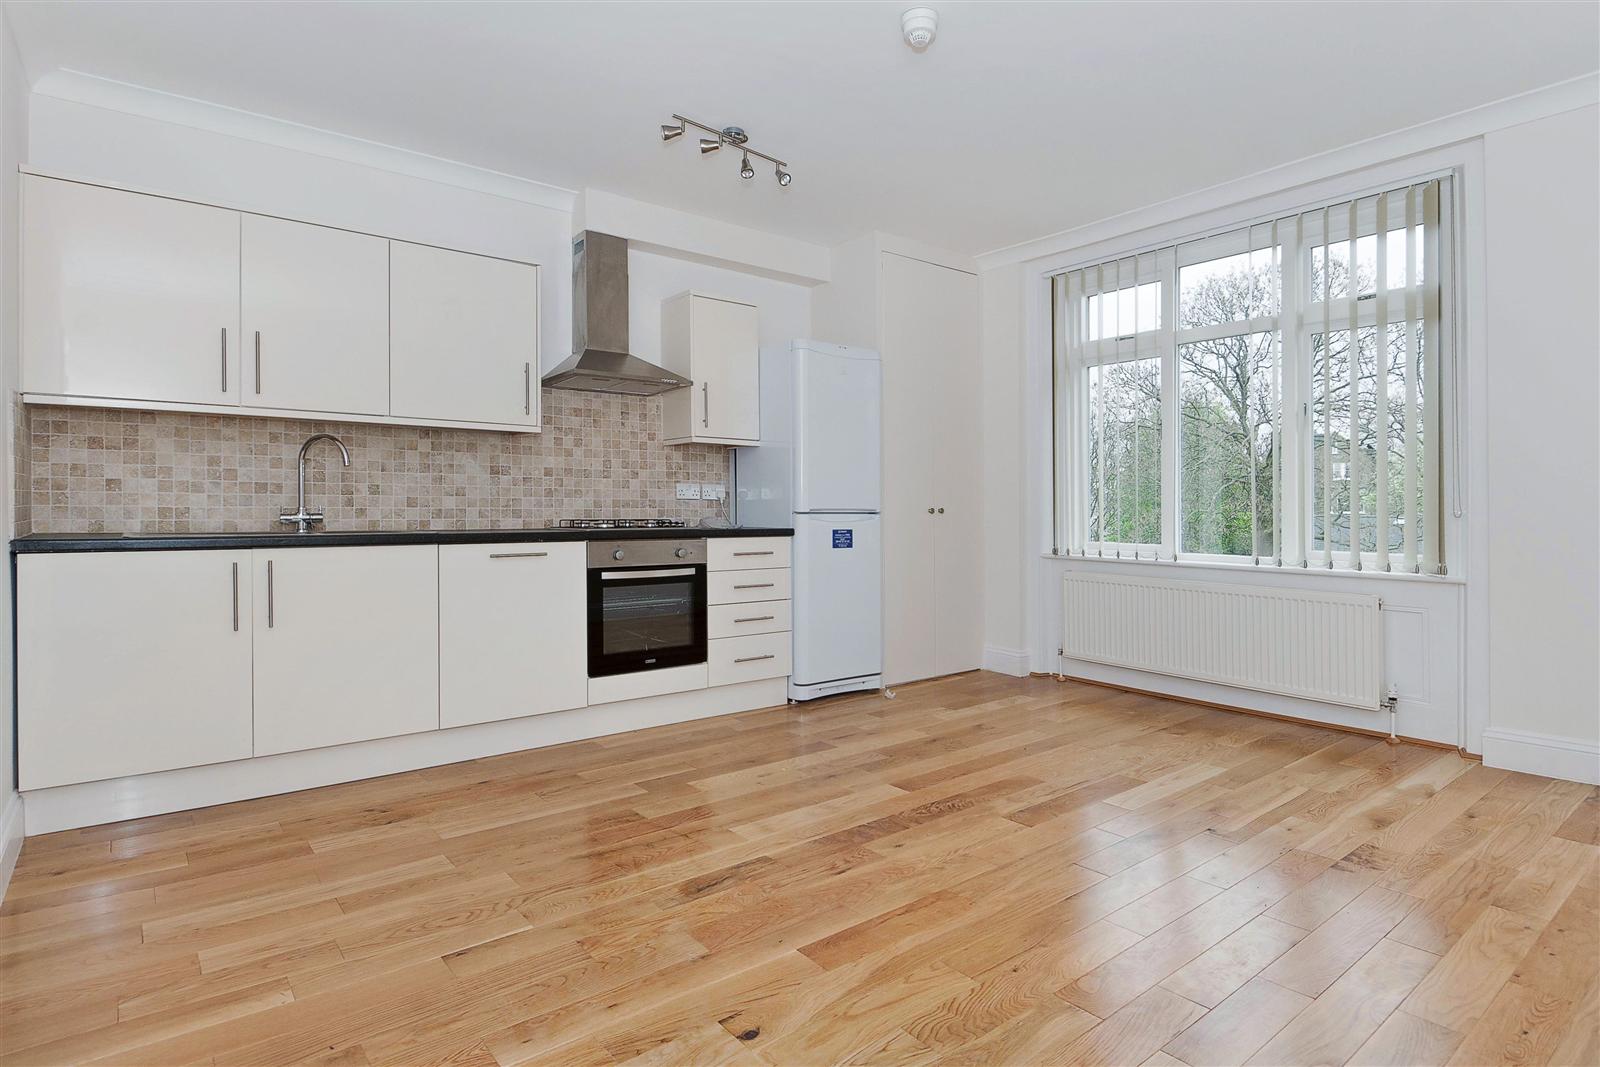 AVAILABLE FROM 11th SEPTEMBER 2023 and WITH HOUSE OF MULTIPLE OCCUPATION LICENSE (HMO) allowing up to three non-related sharers to occupy. Forming part of a development of converted flats within a pair of  semi detached period houses is this UNFURNISHED second and third floor SPLIT LEVEL 1001 ...